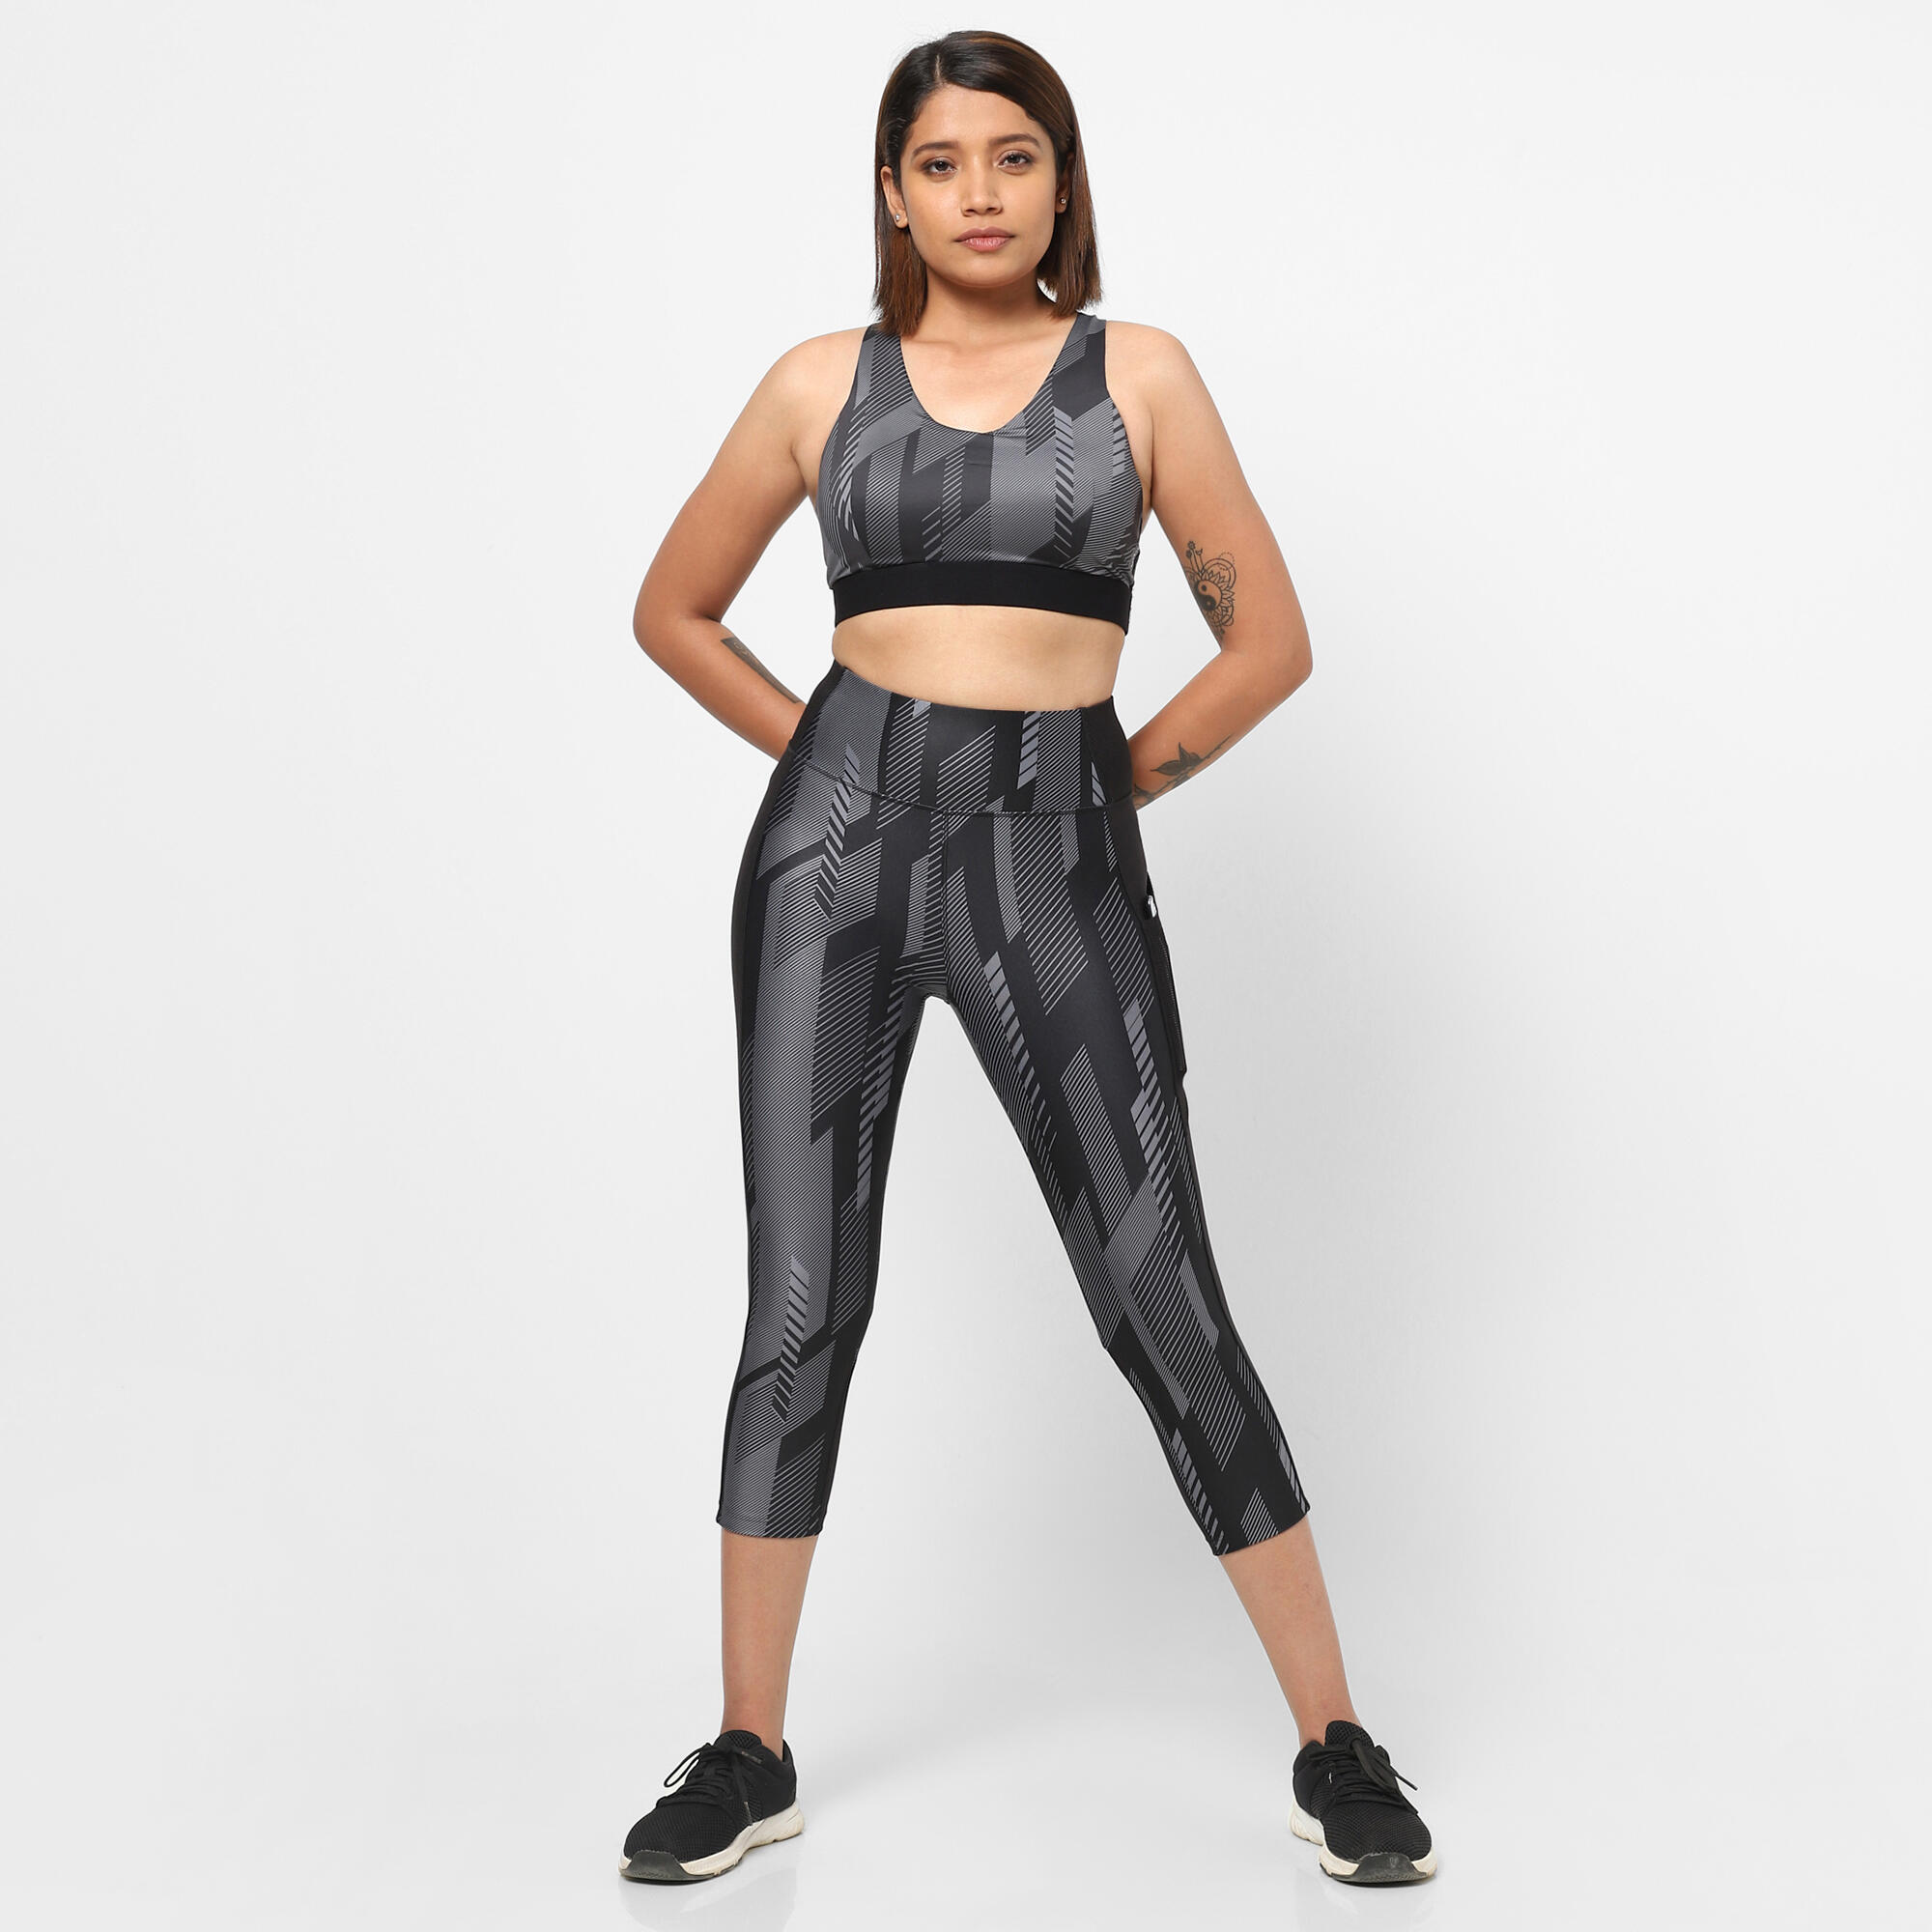 Cukoo Lingerie  Cukoo Activewearyogagymsports Track Pants With Pockets   MultiColor Online  Nykaa Fashion